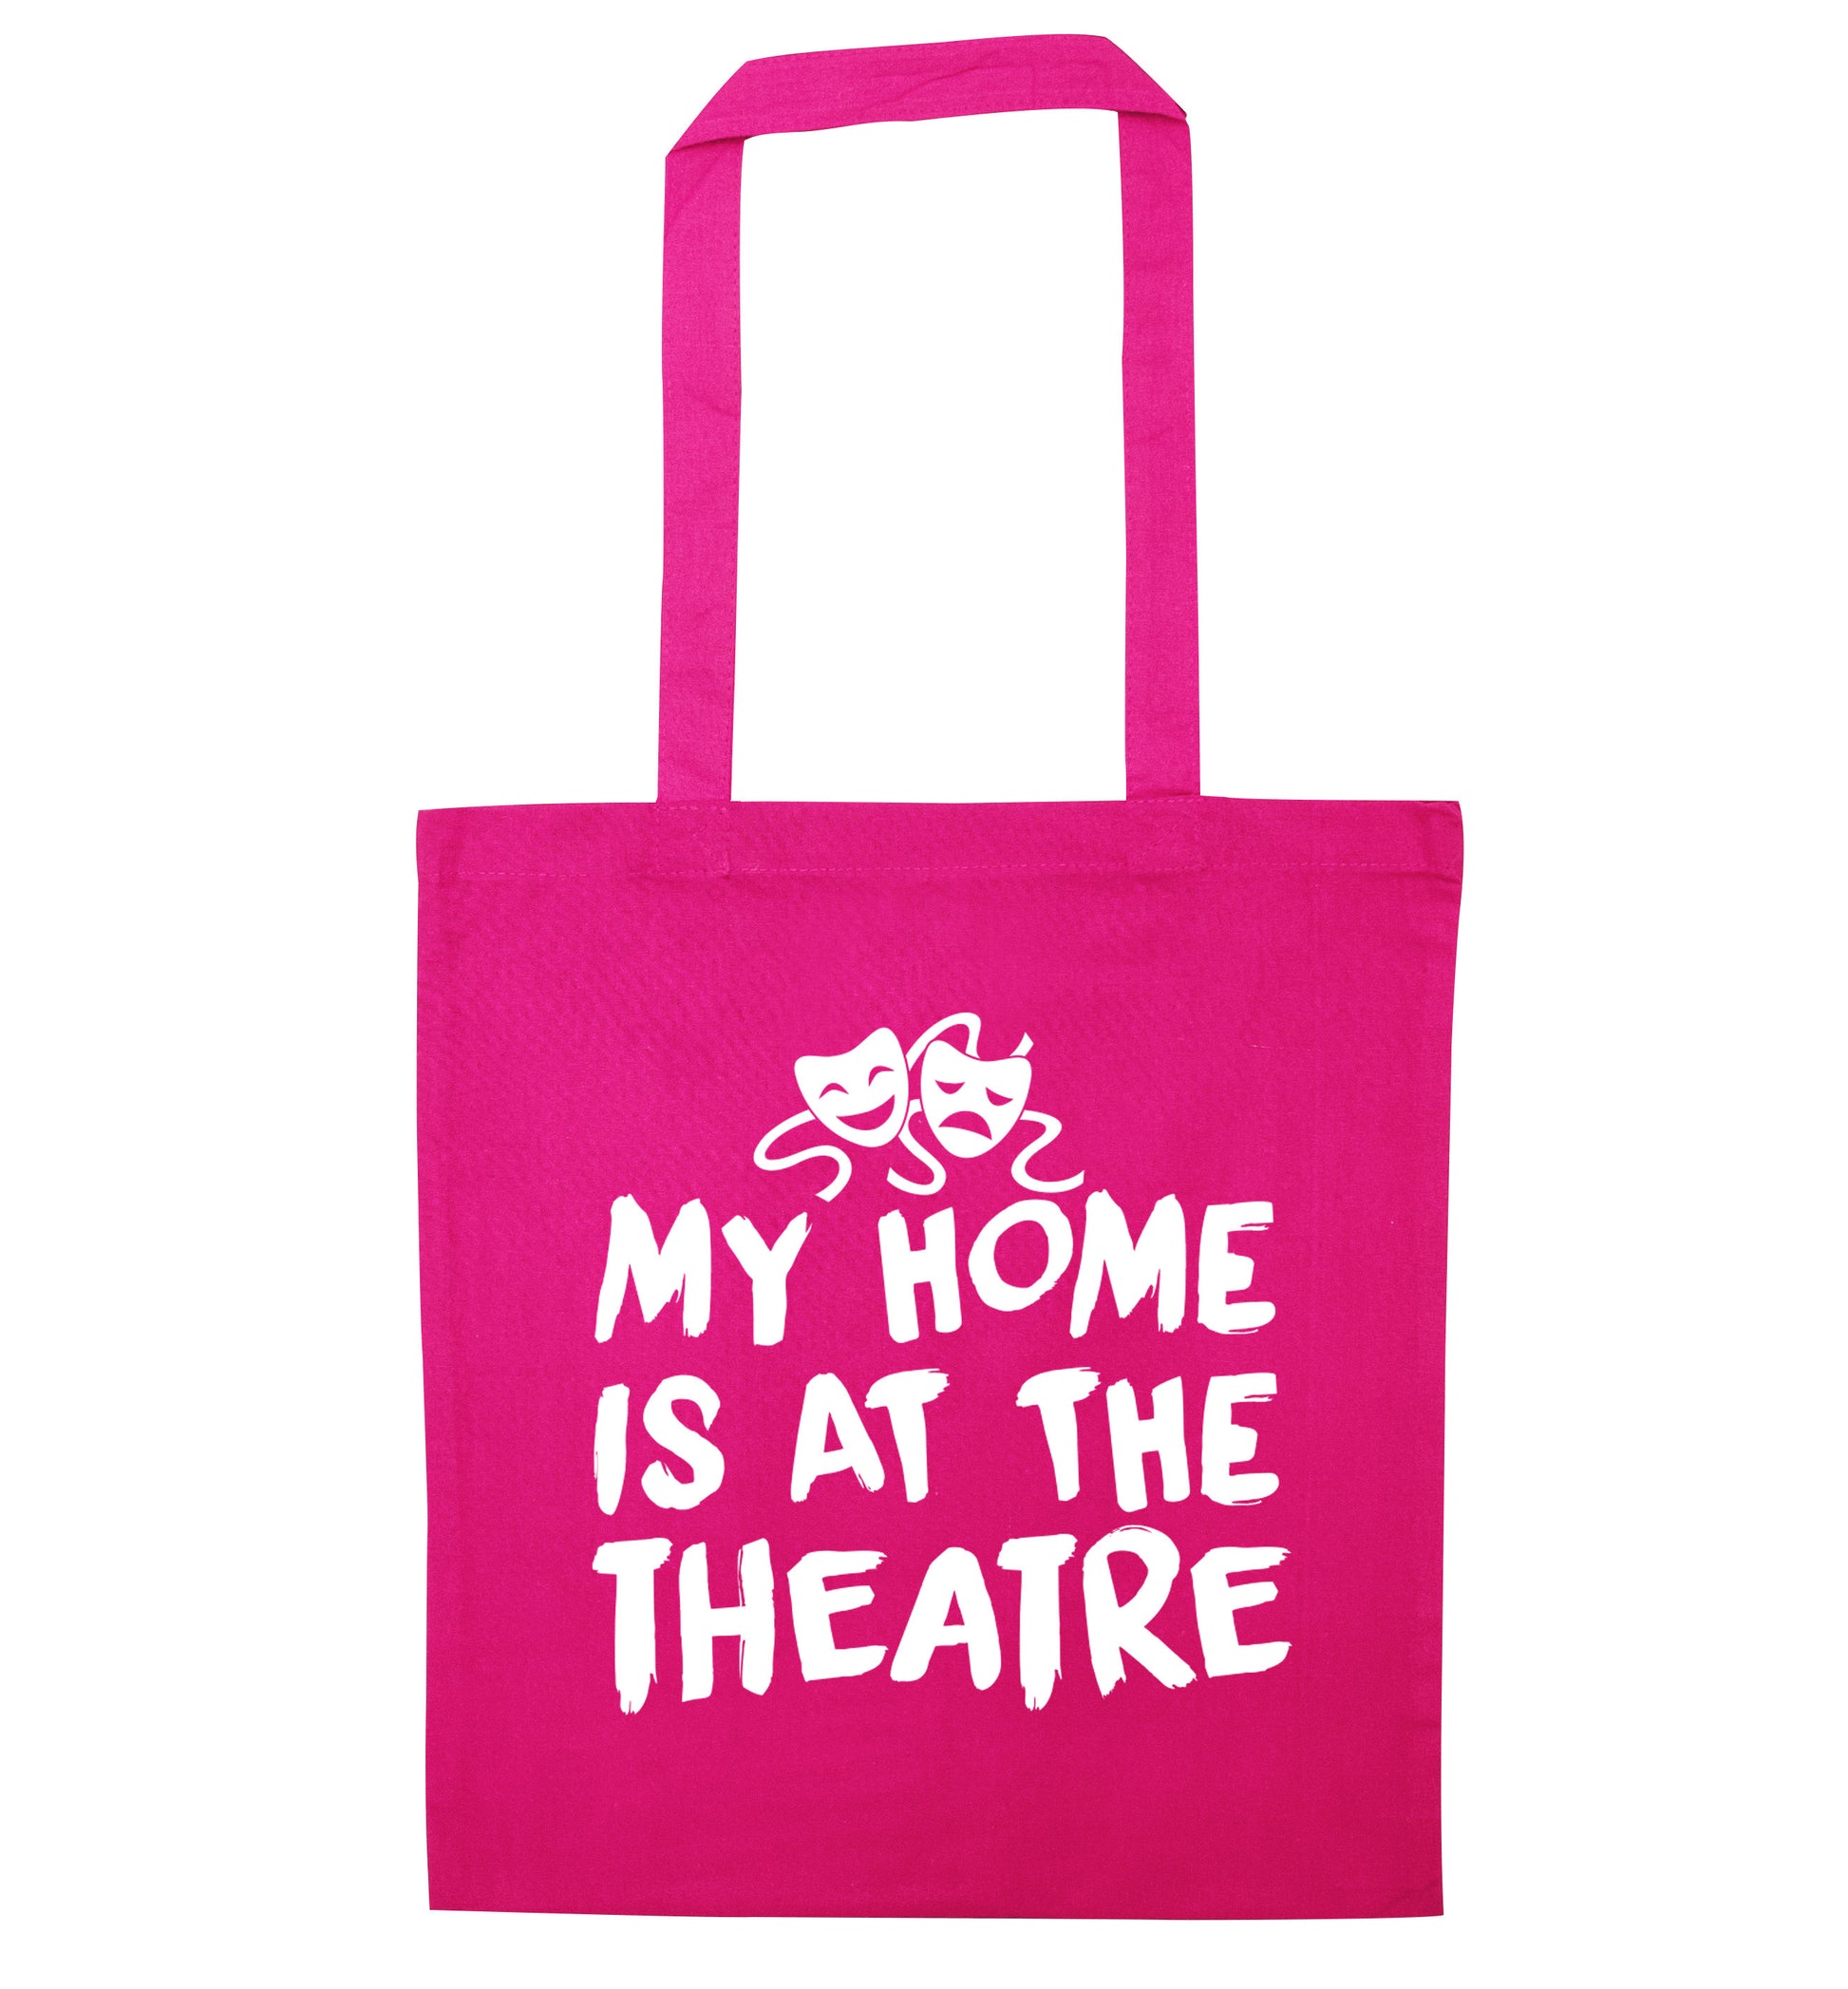 My home is at the theatre pink tote bag